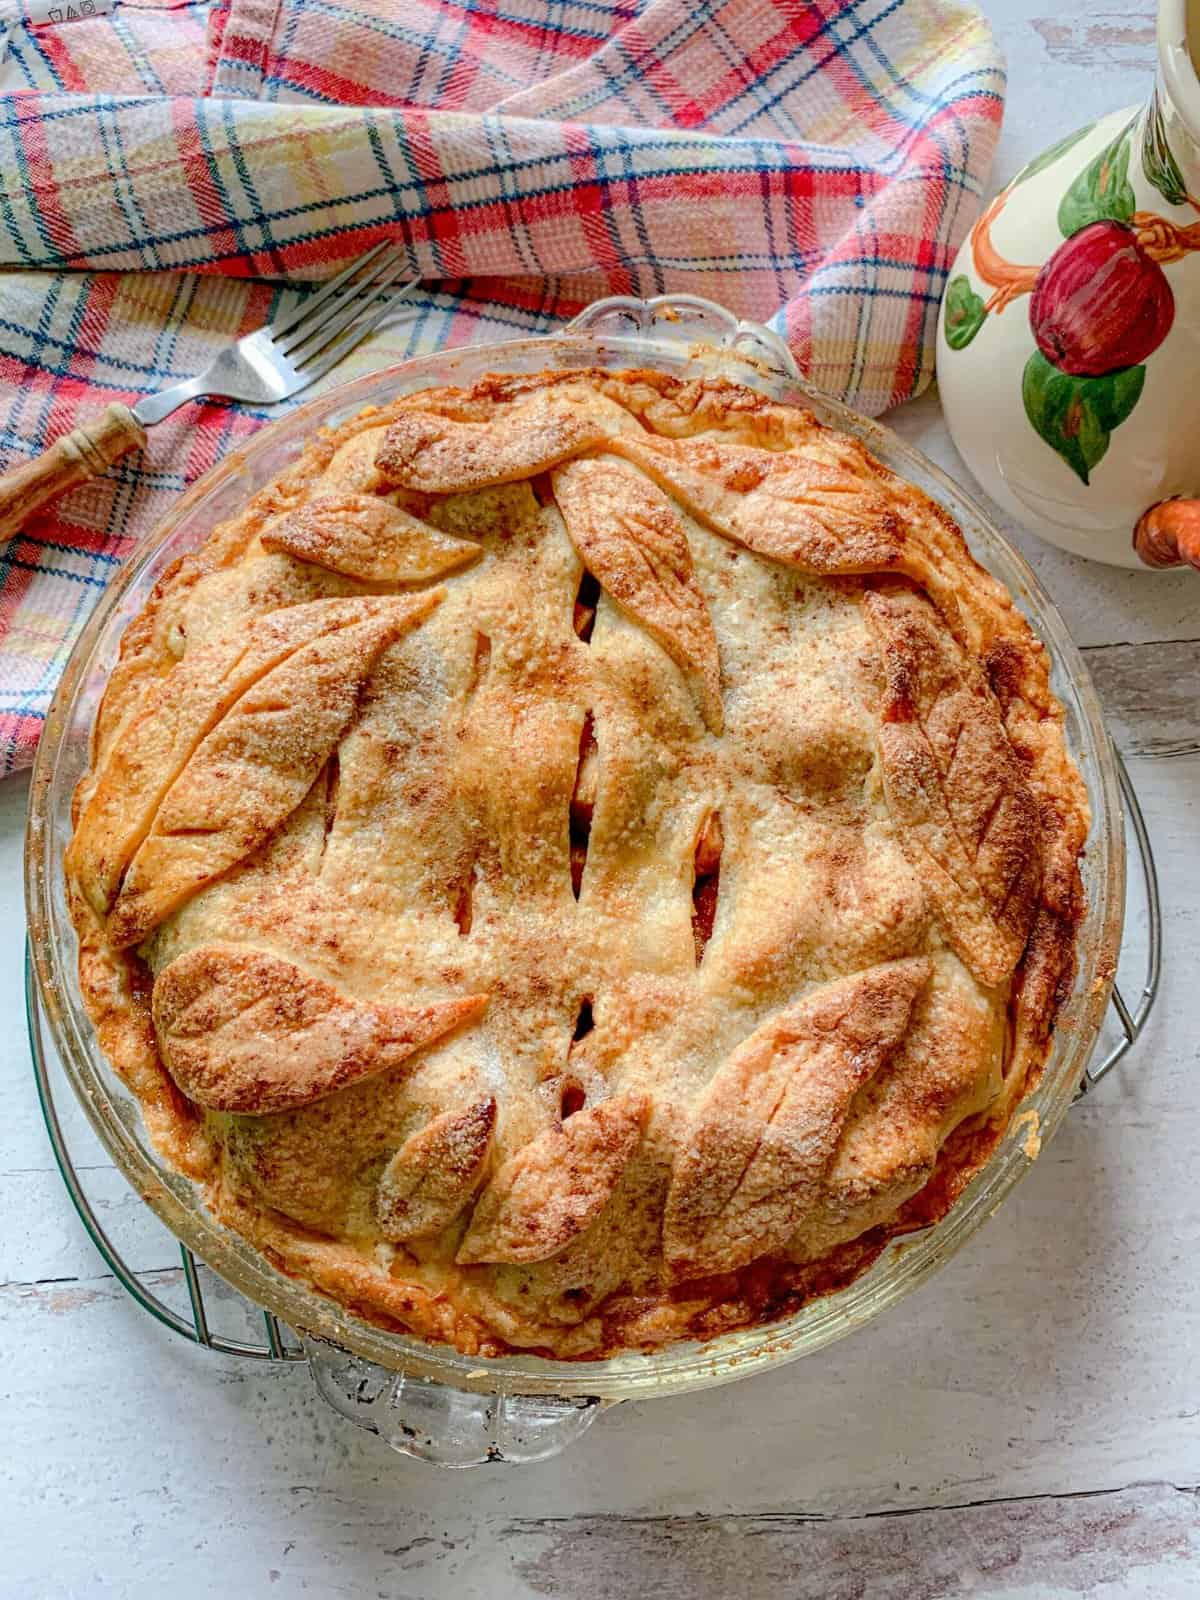  You can practically taste the love that went into making this pie